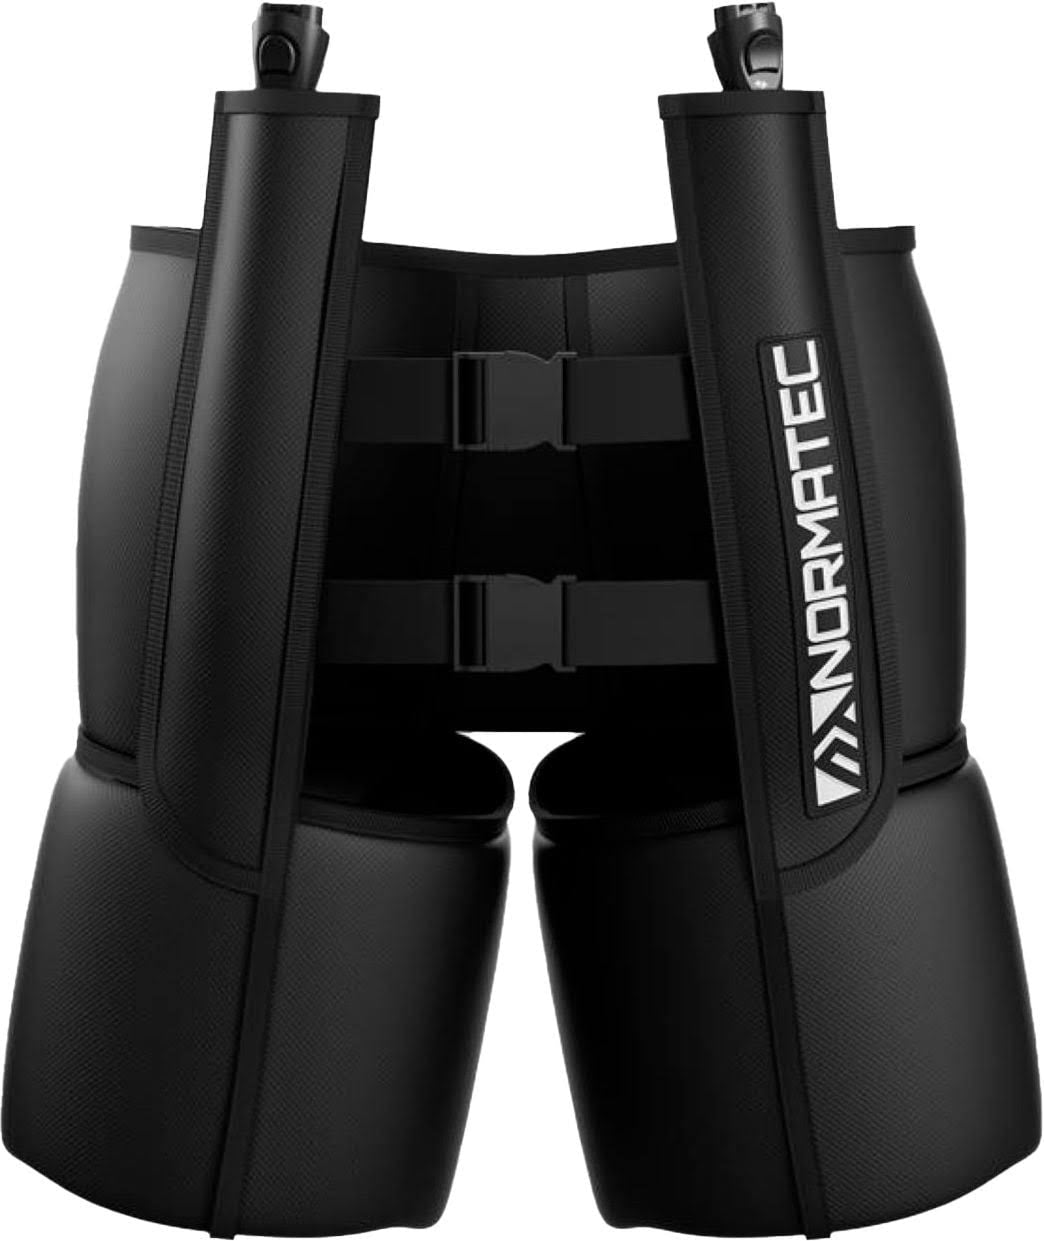 Normatec Hip attachment - Recovery gear